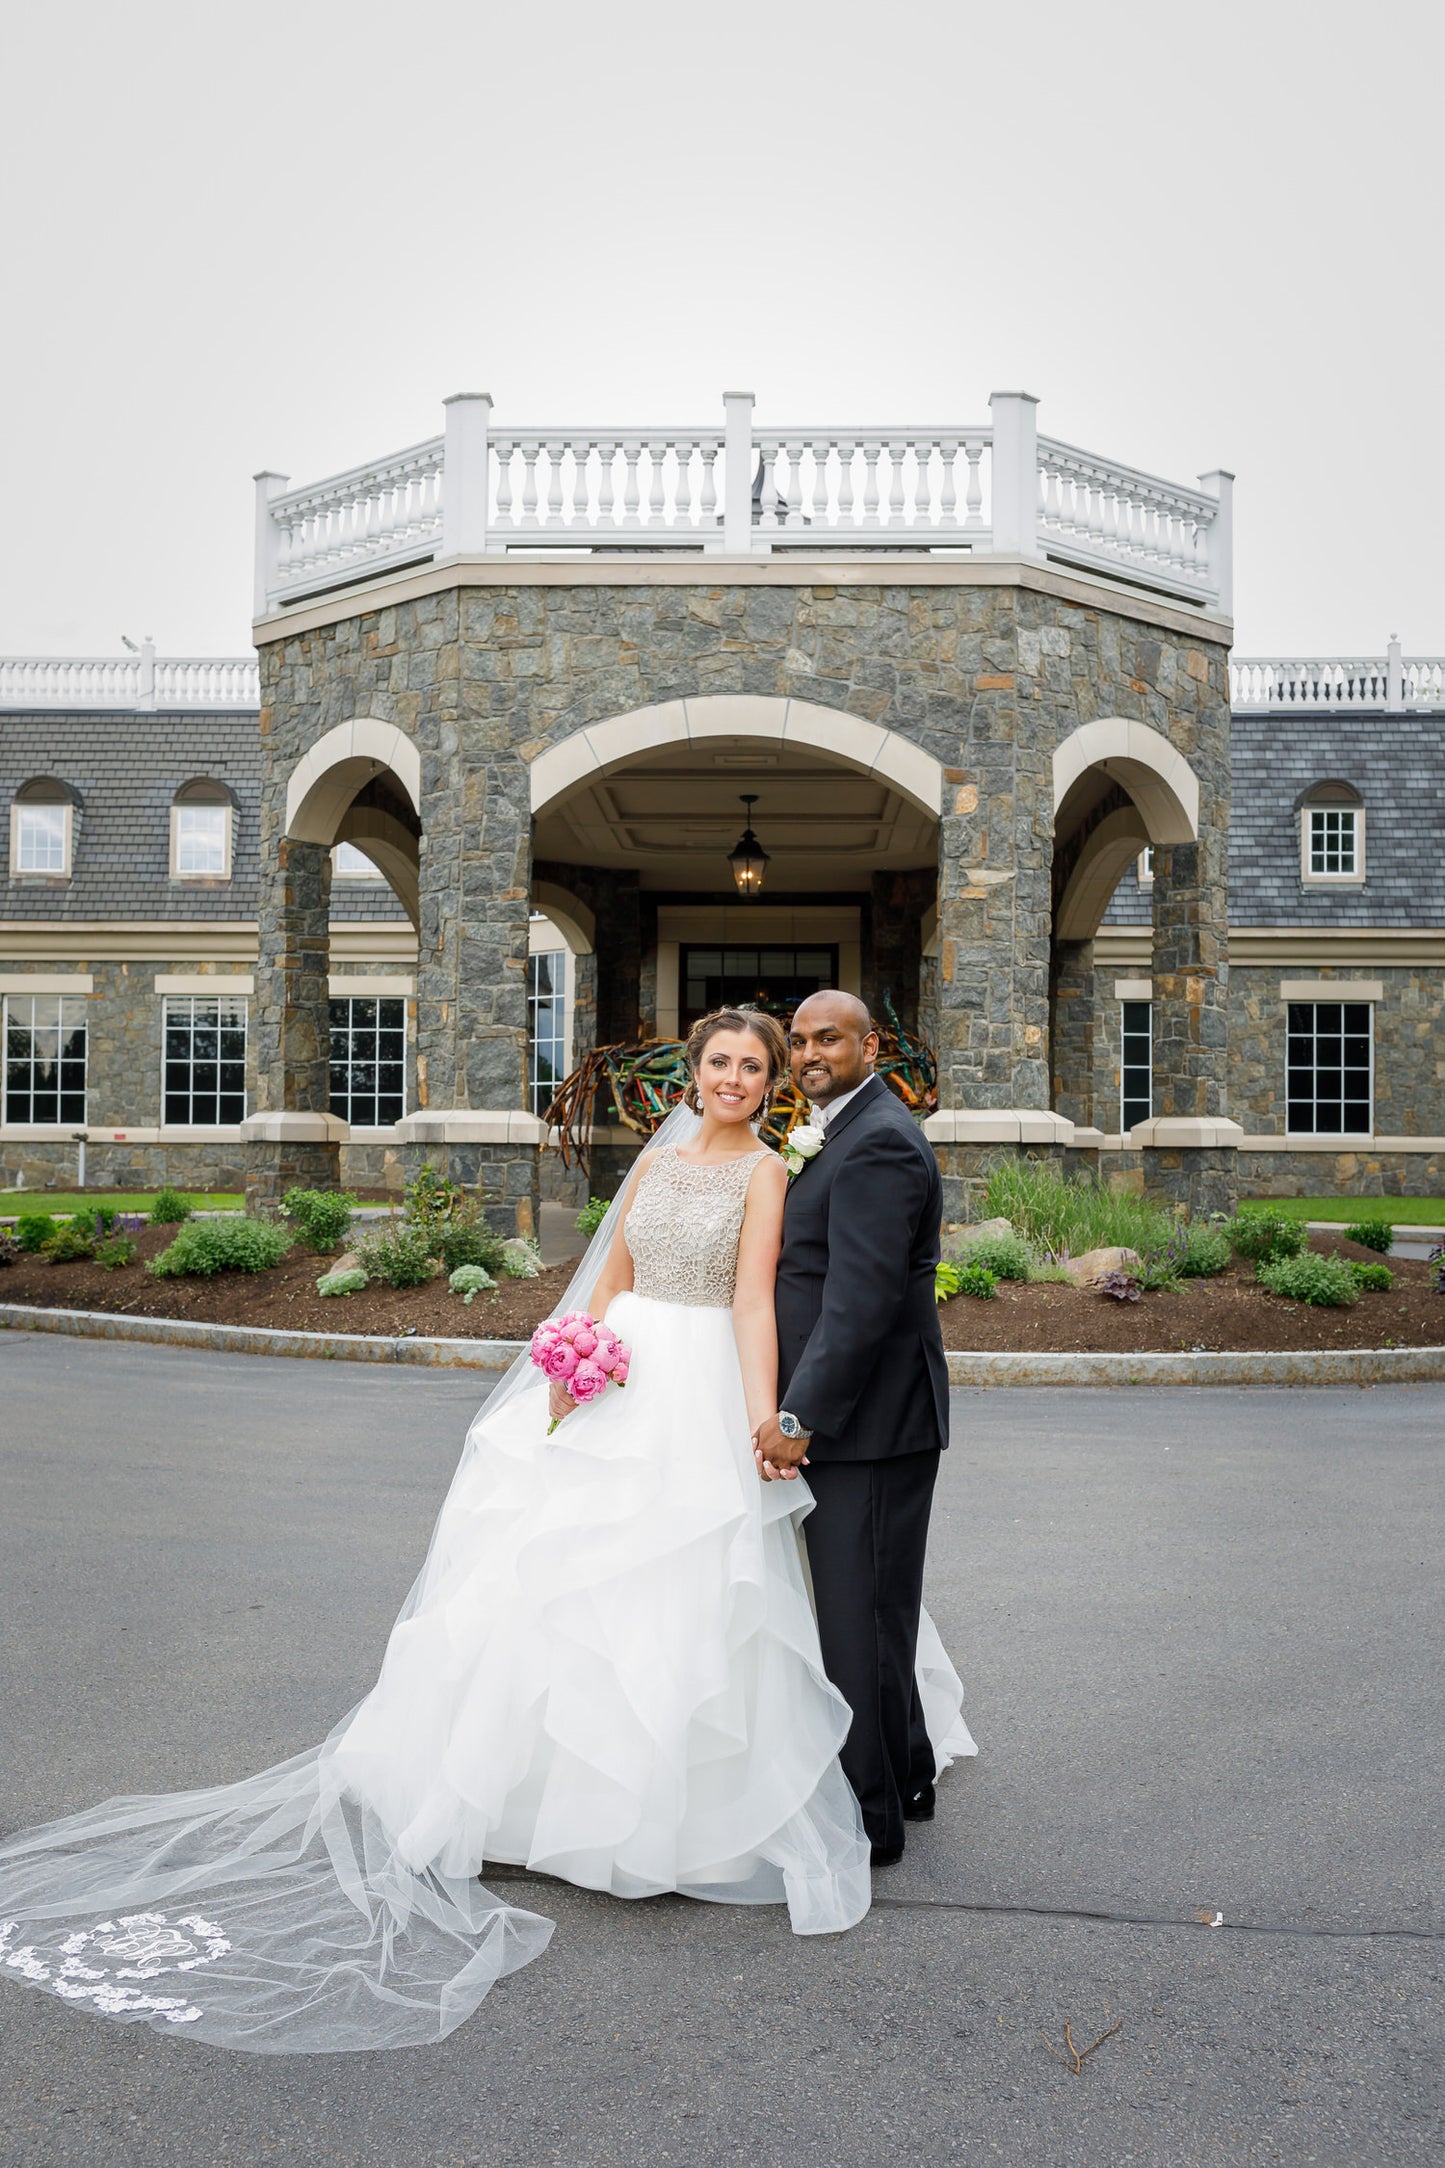 formal castle wedding with bride in ballgown and long monogrammed veil